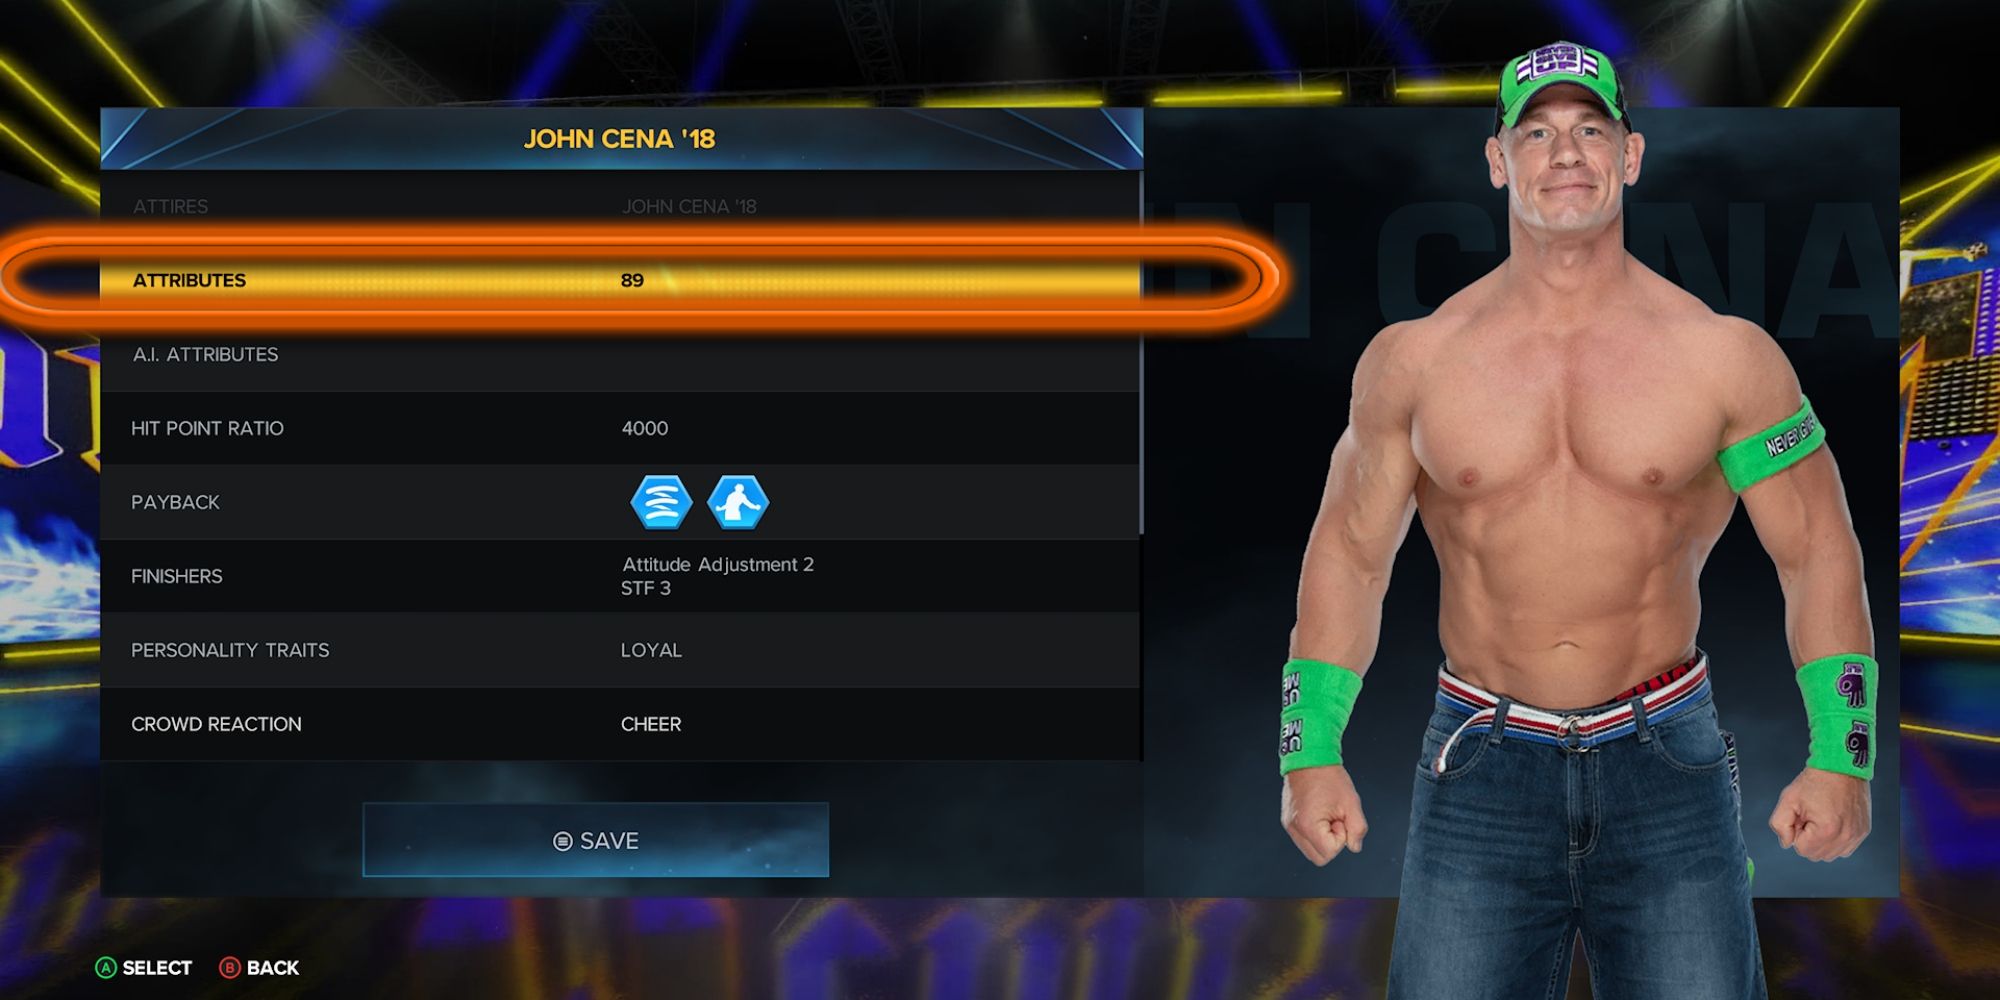 WWE 2K23 Screenshot Of John Cena '18 Superstar Page With Attributes Highlighted